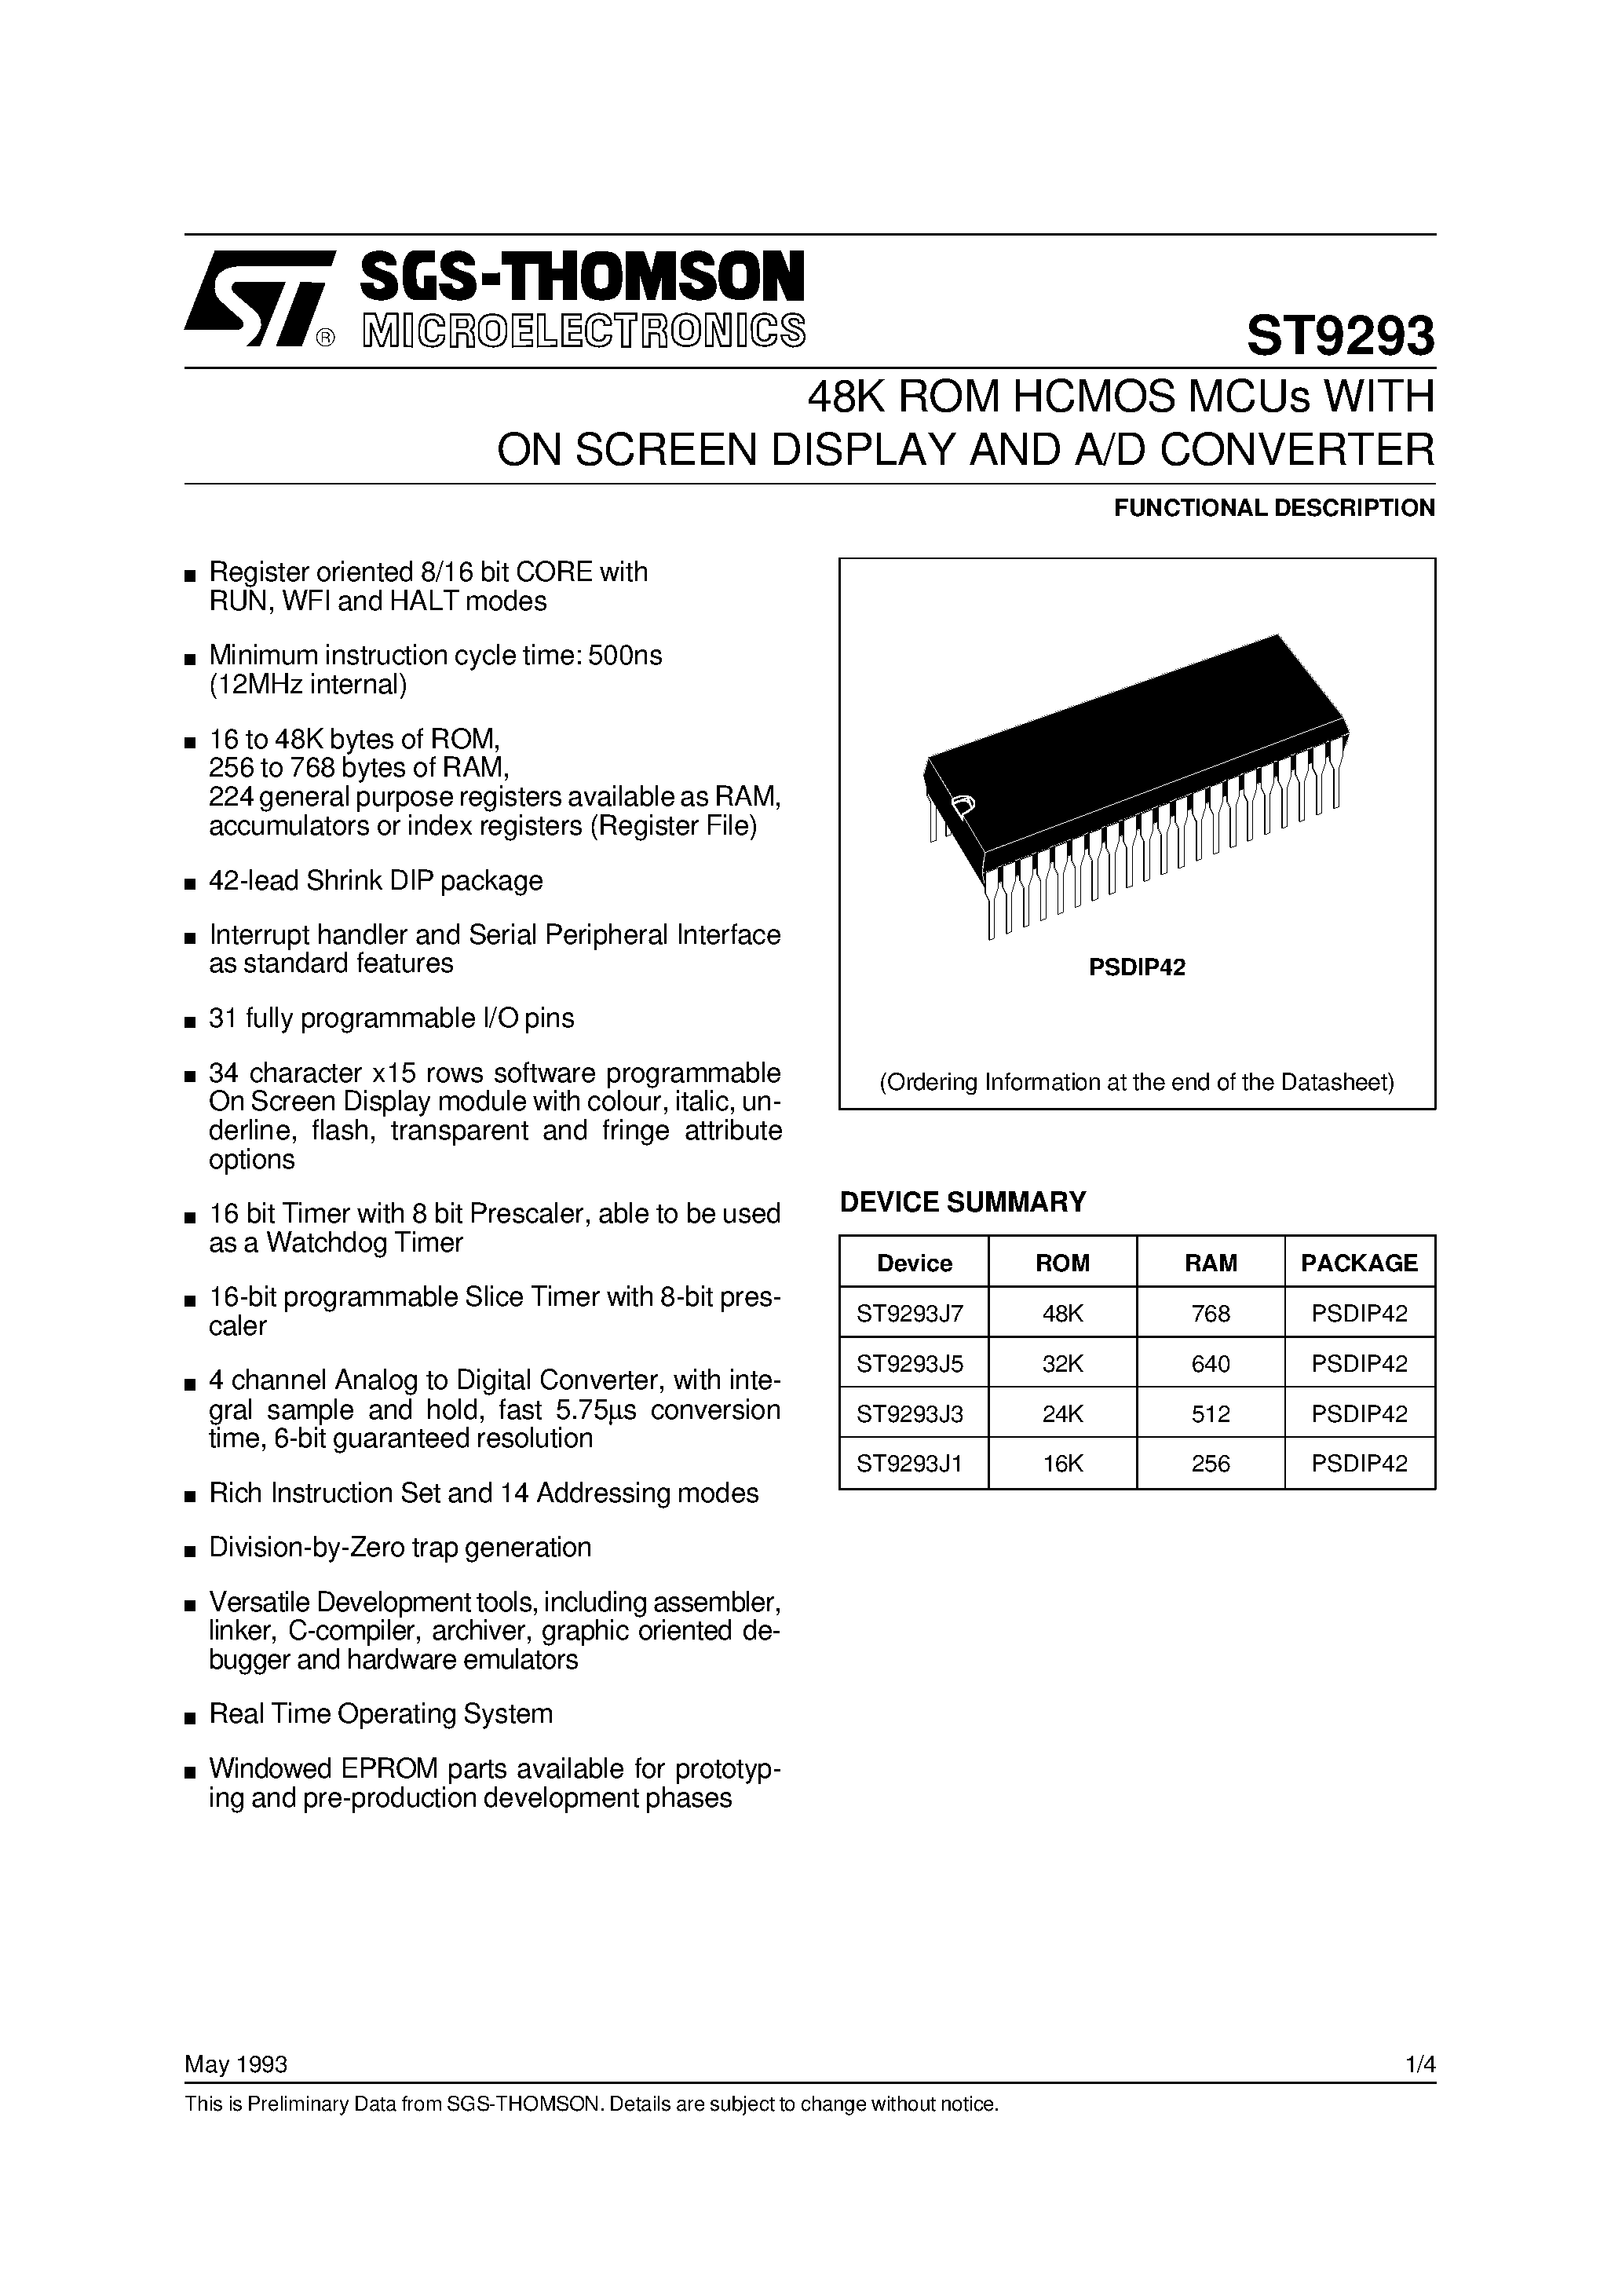 Datasheet ST9293 - 48K ROM HCMOS MCUs WITH ON SCREEN DISPLAY AND A/D CONVERTER page 1